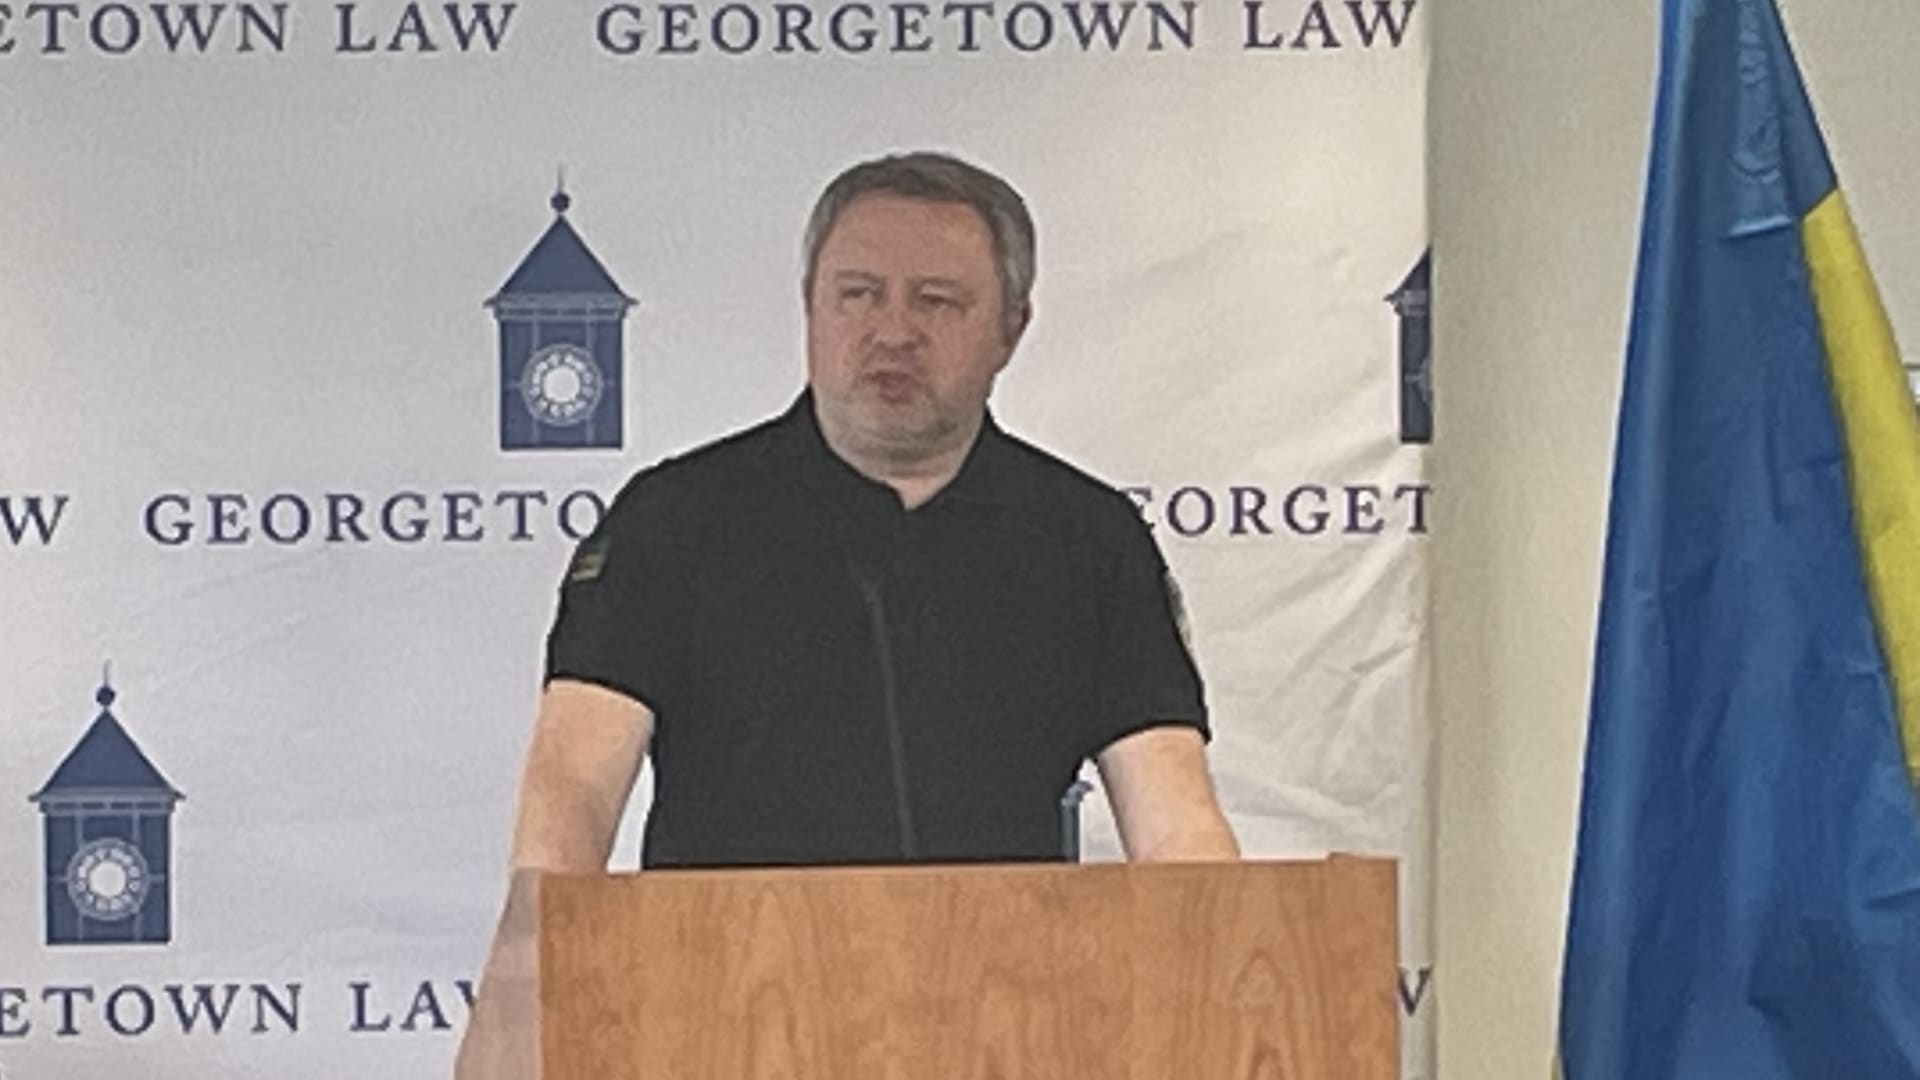 Ukraine's Prosecutor General Andriy Kostin participates in a panel discussion at Georgetown Law in Washington, D.C., on February 1, 2023.